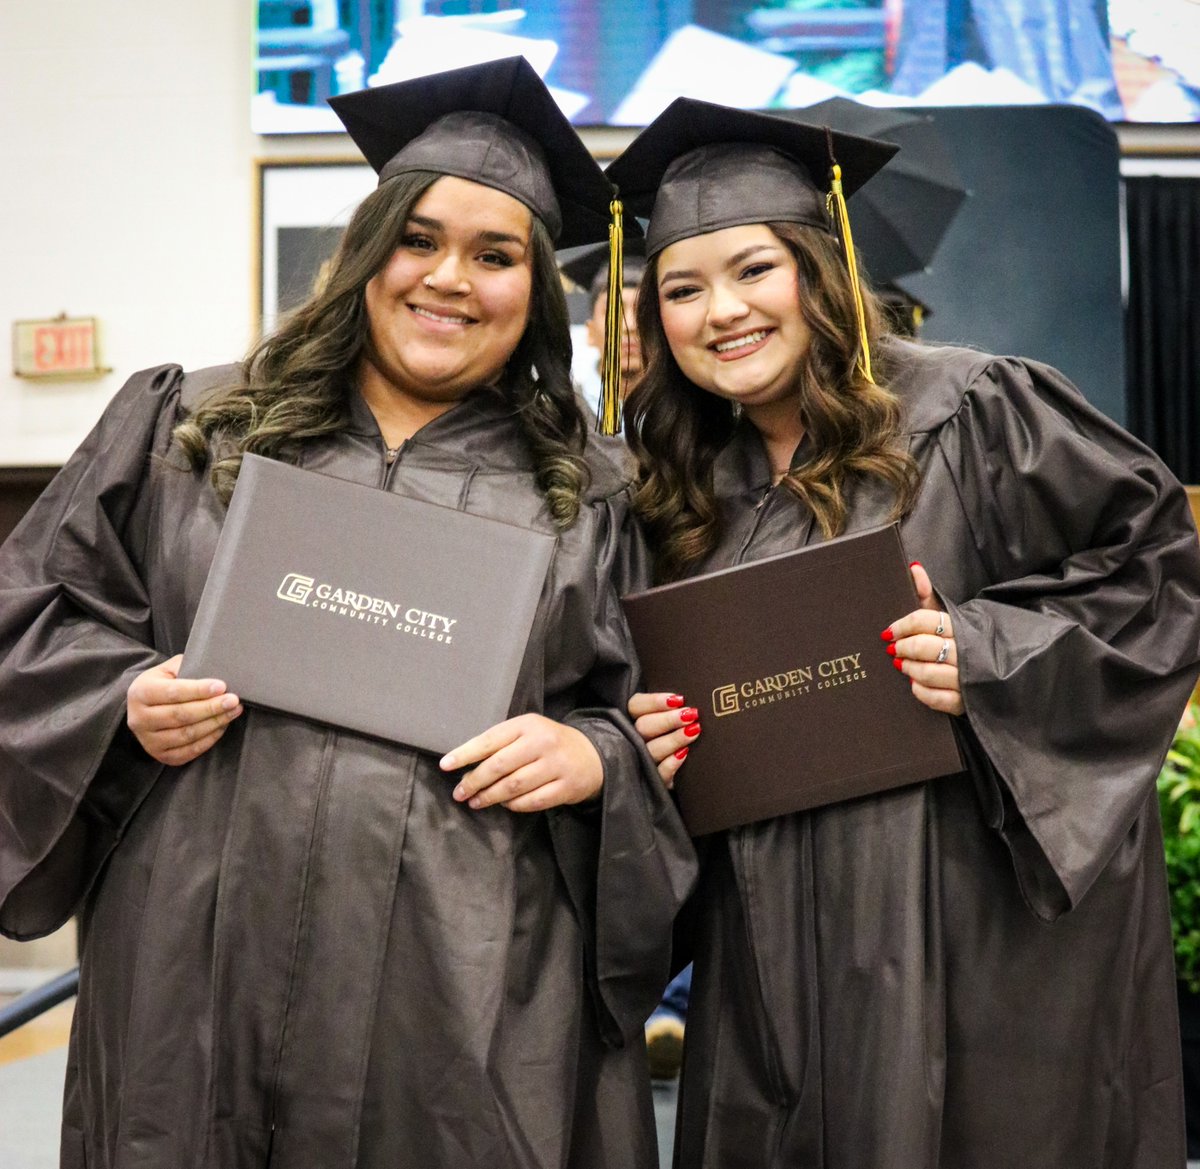 GCCC Graduates First Students from Medical Assistant Program: Christine Strout, Leslie Barrios, and Anahi Franco. Read more: ow.ly/N9qh50RBYNH